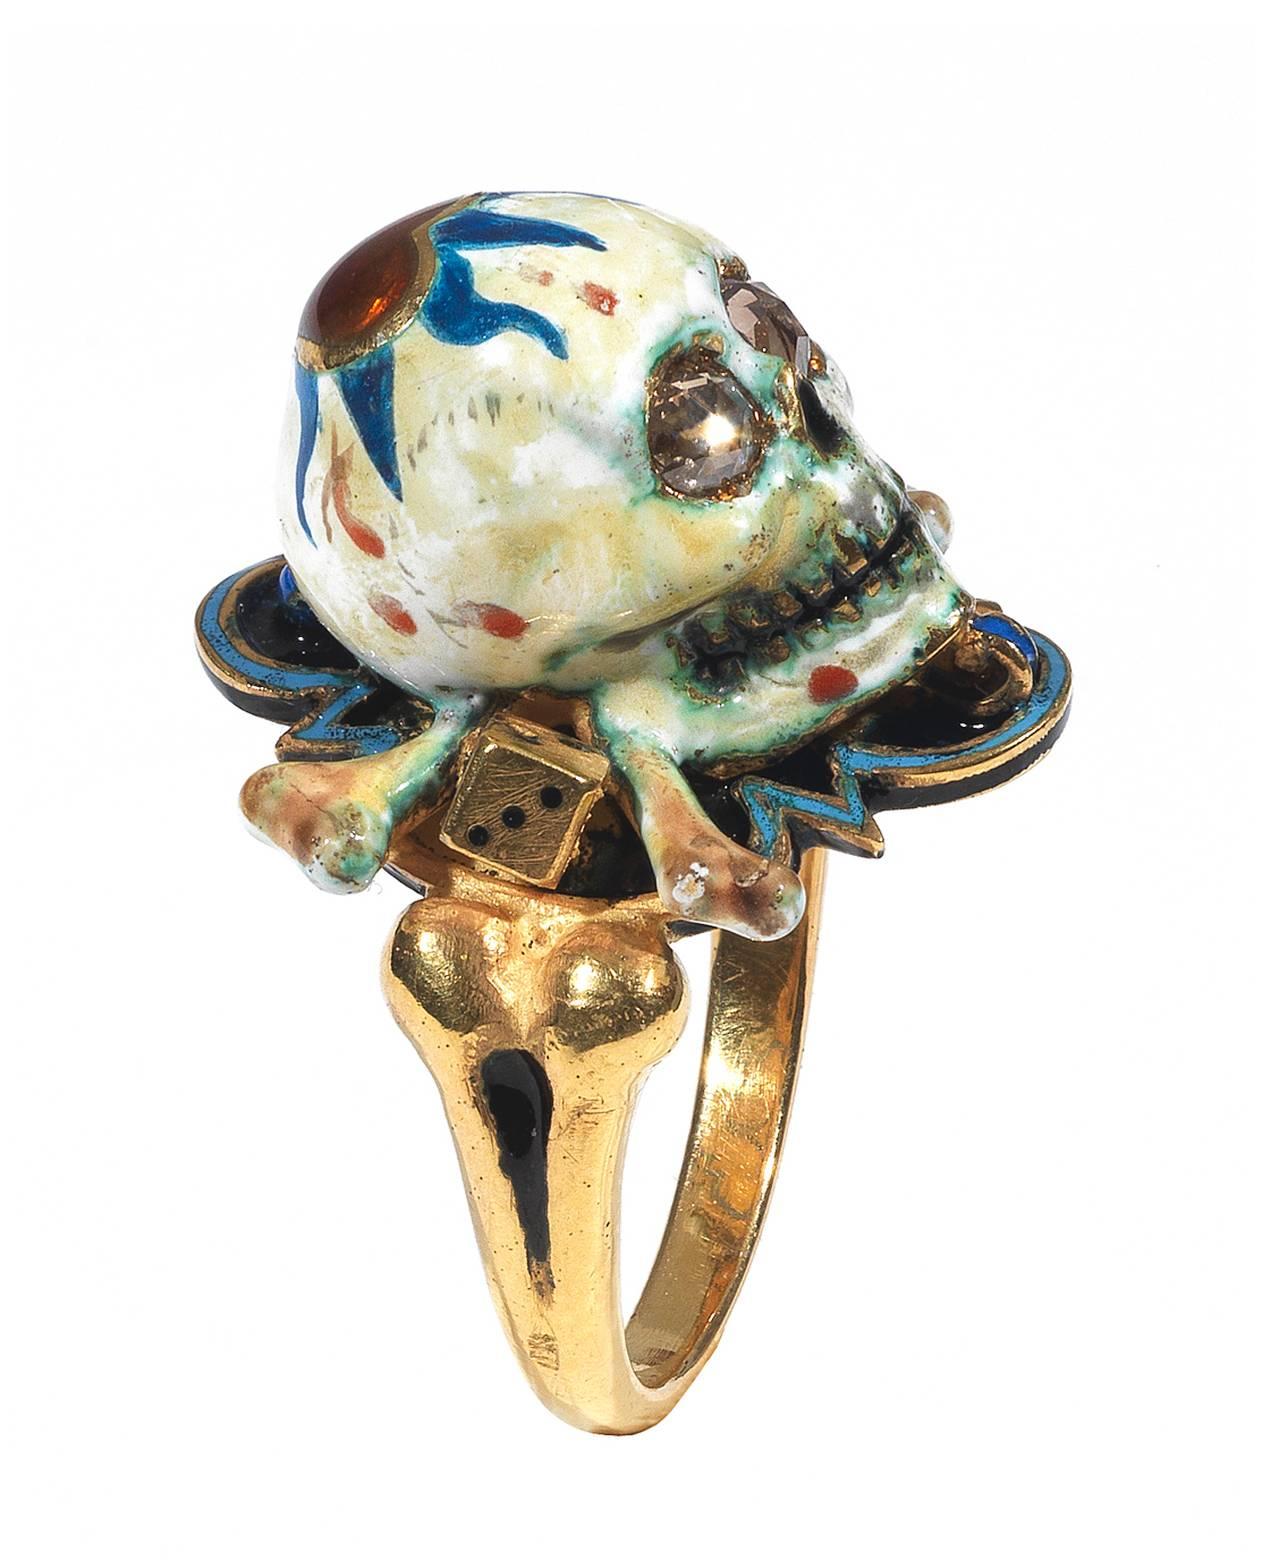 

Renaissance style Memento Mori skull ring made with champleve multicolored enamels and rose cut diamonds eyes.

Mounted in 18Kt gold

Signed A. Codognato

Weight: 21.1 gr

Finger size: 7

